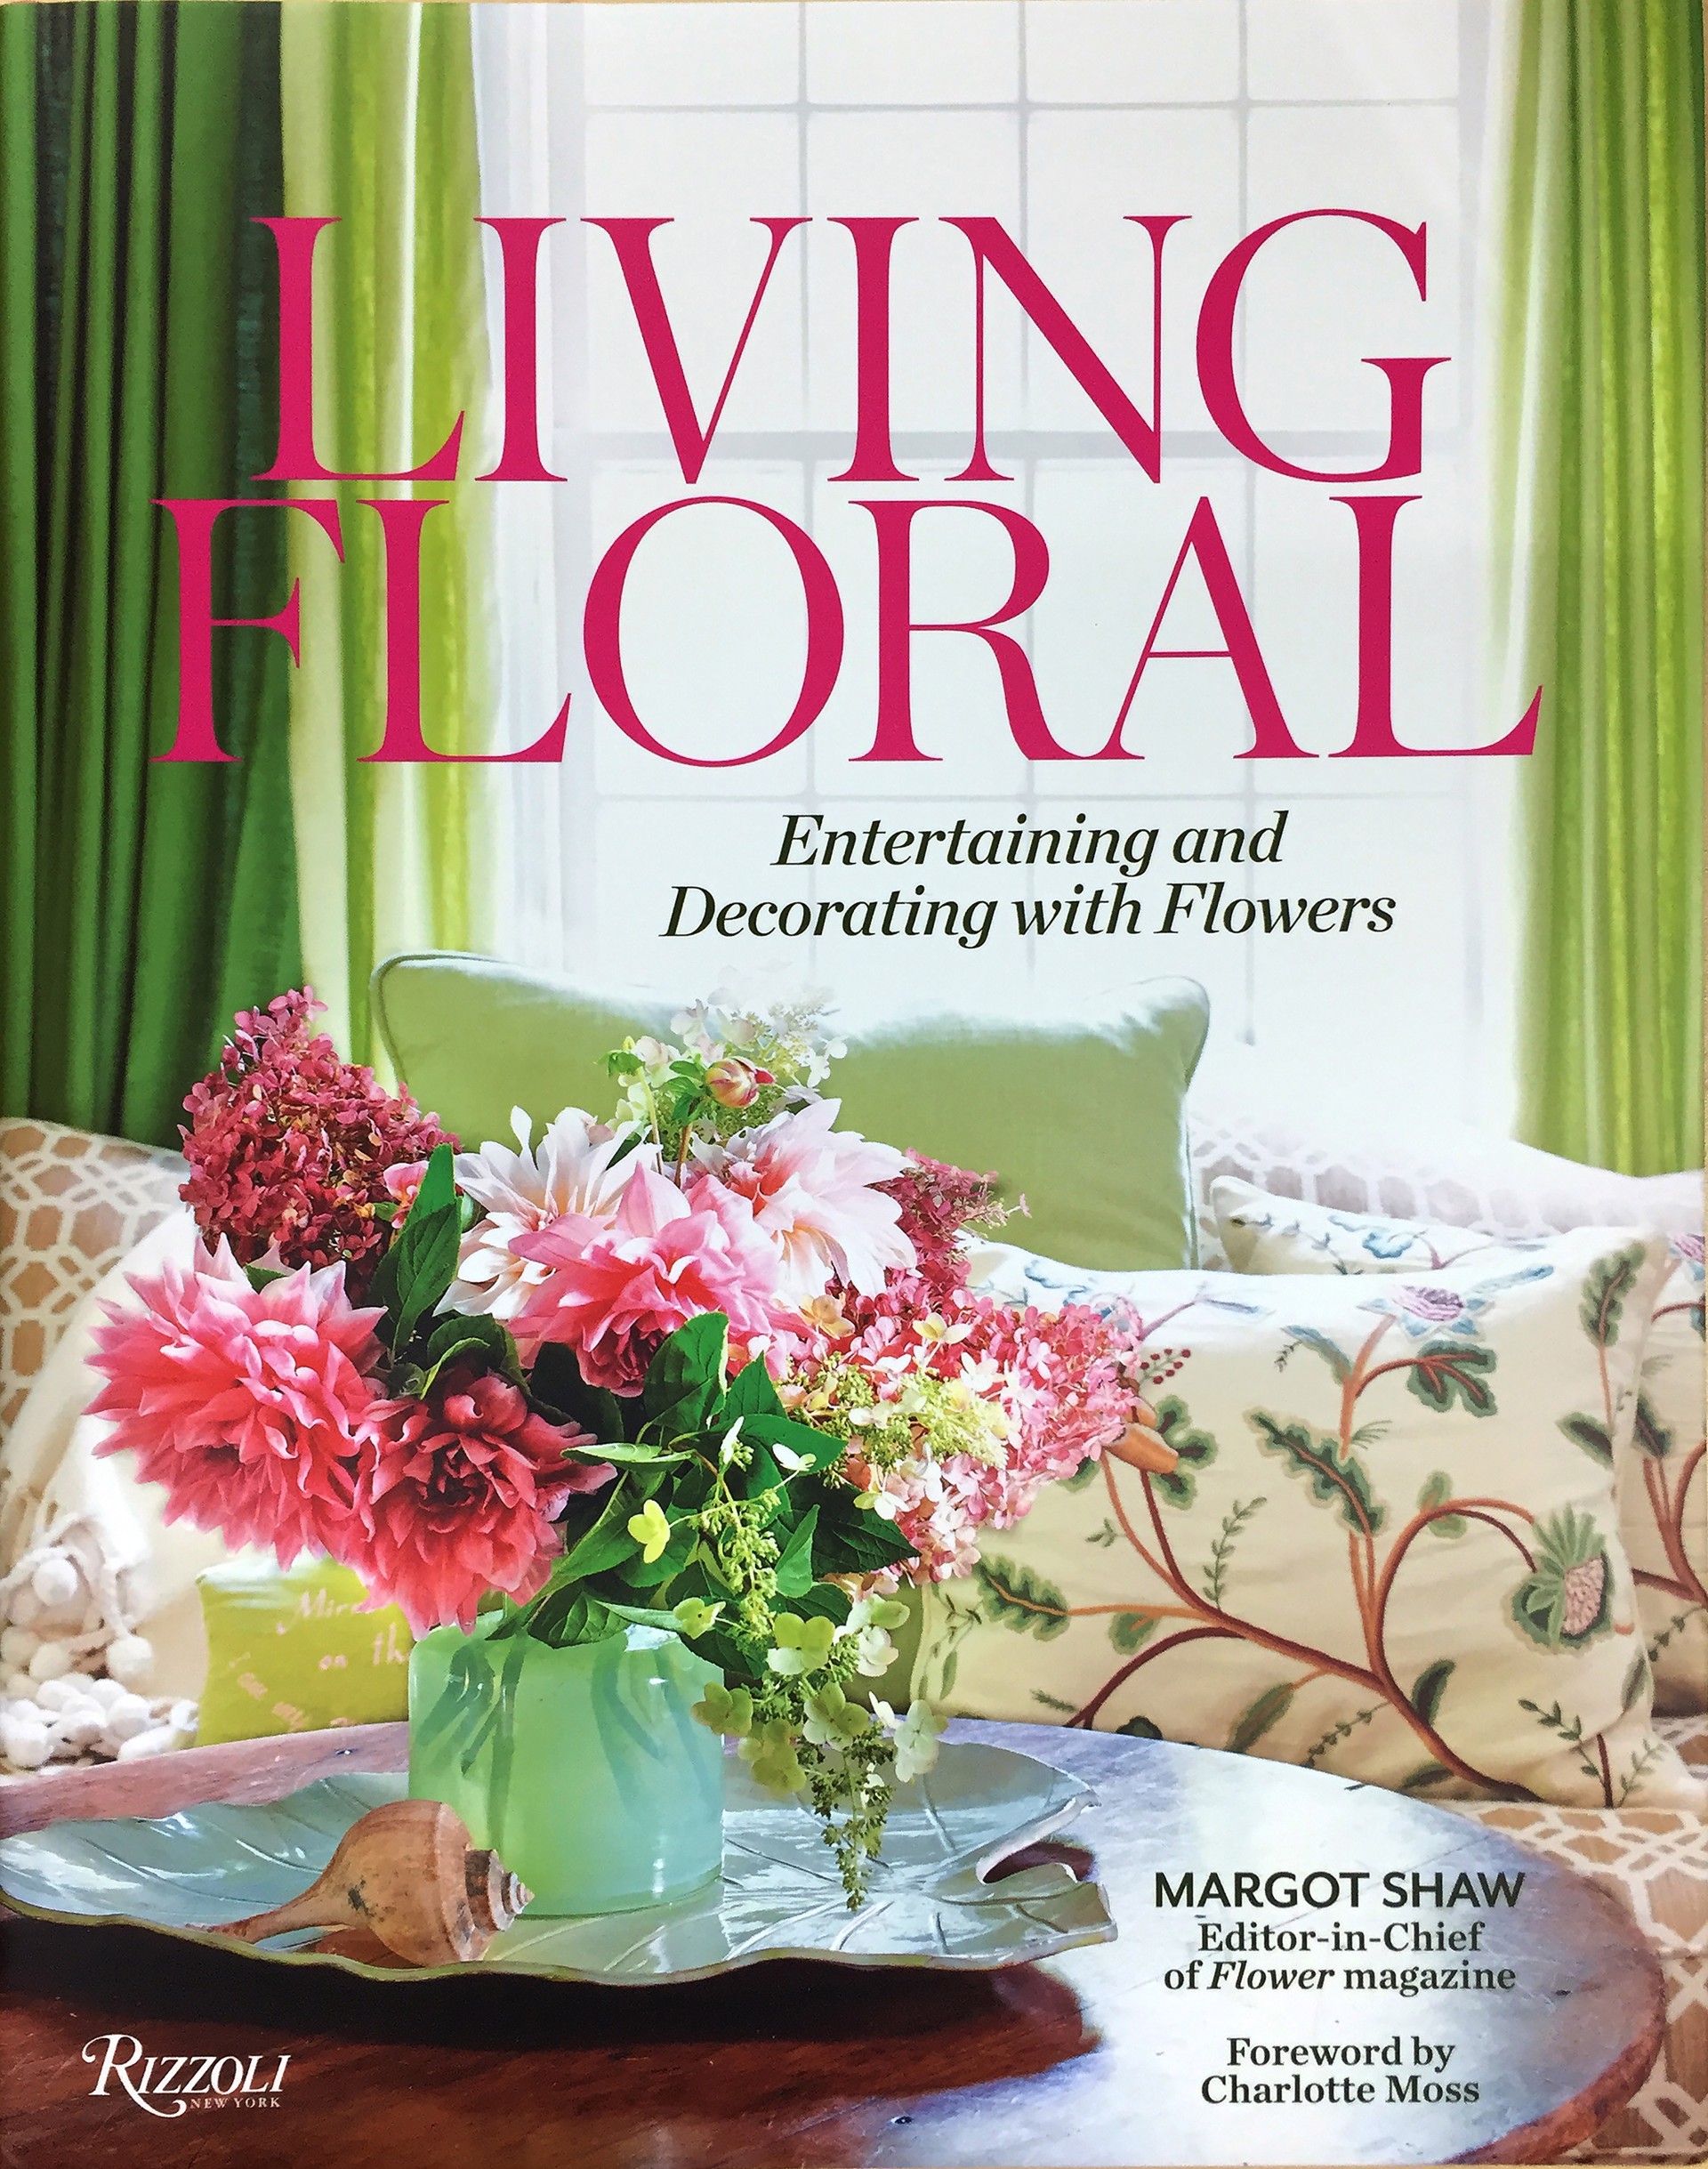 Living Floral (Margot Shaw Book)